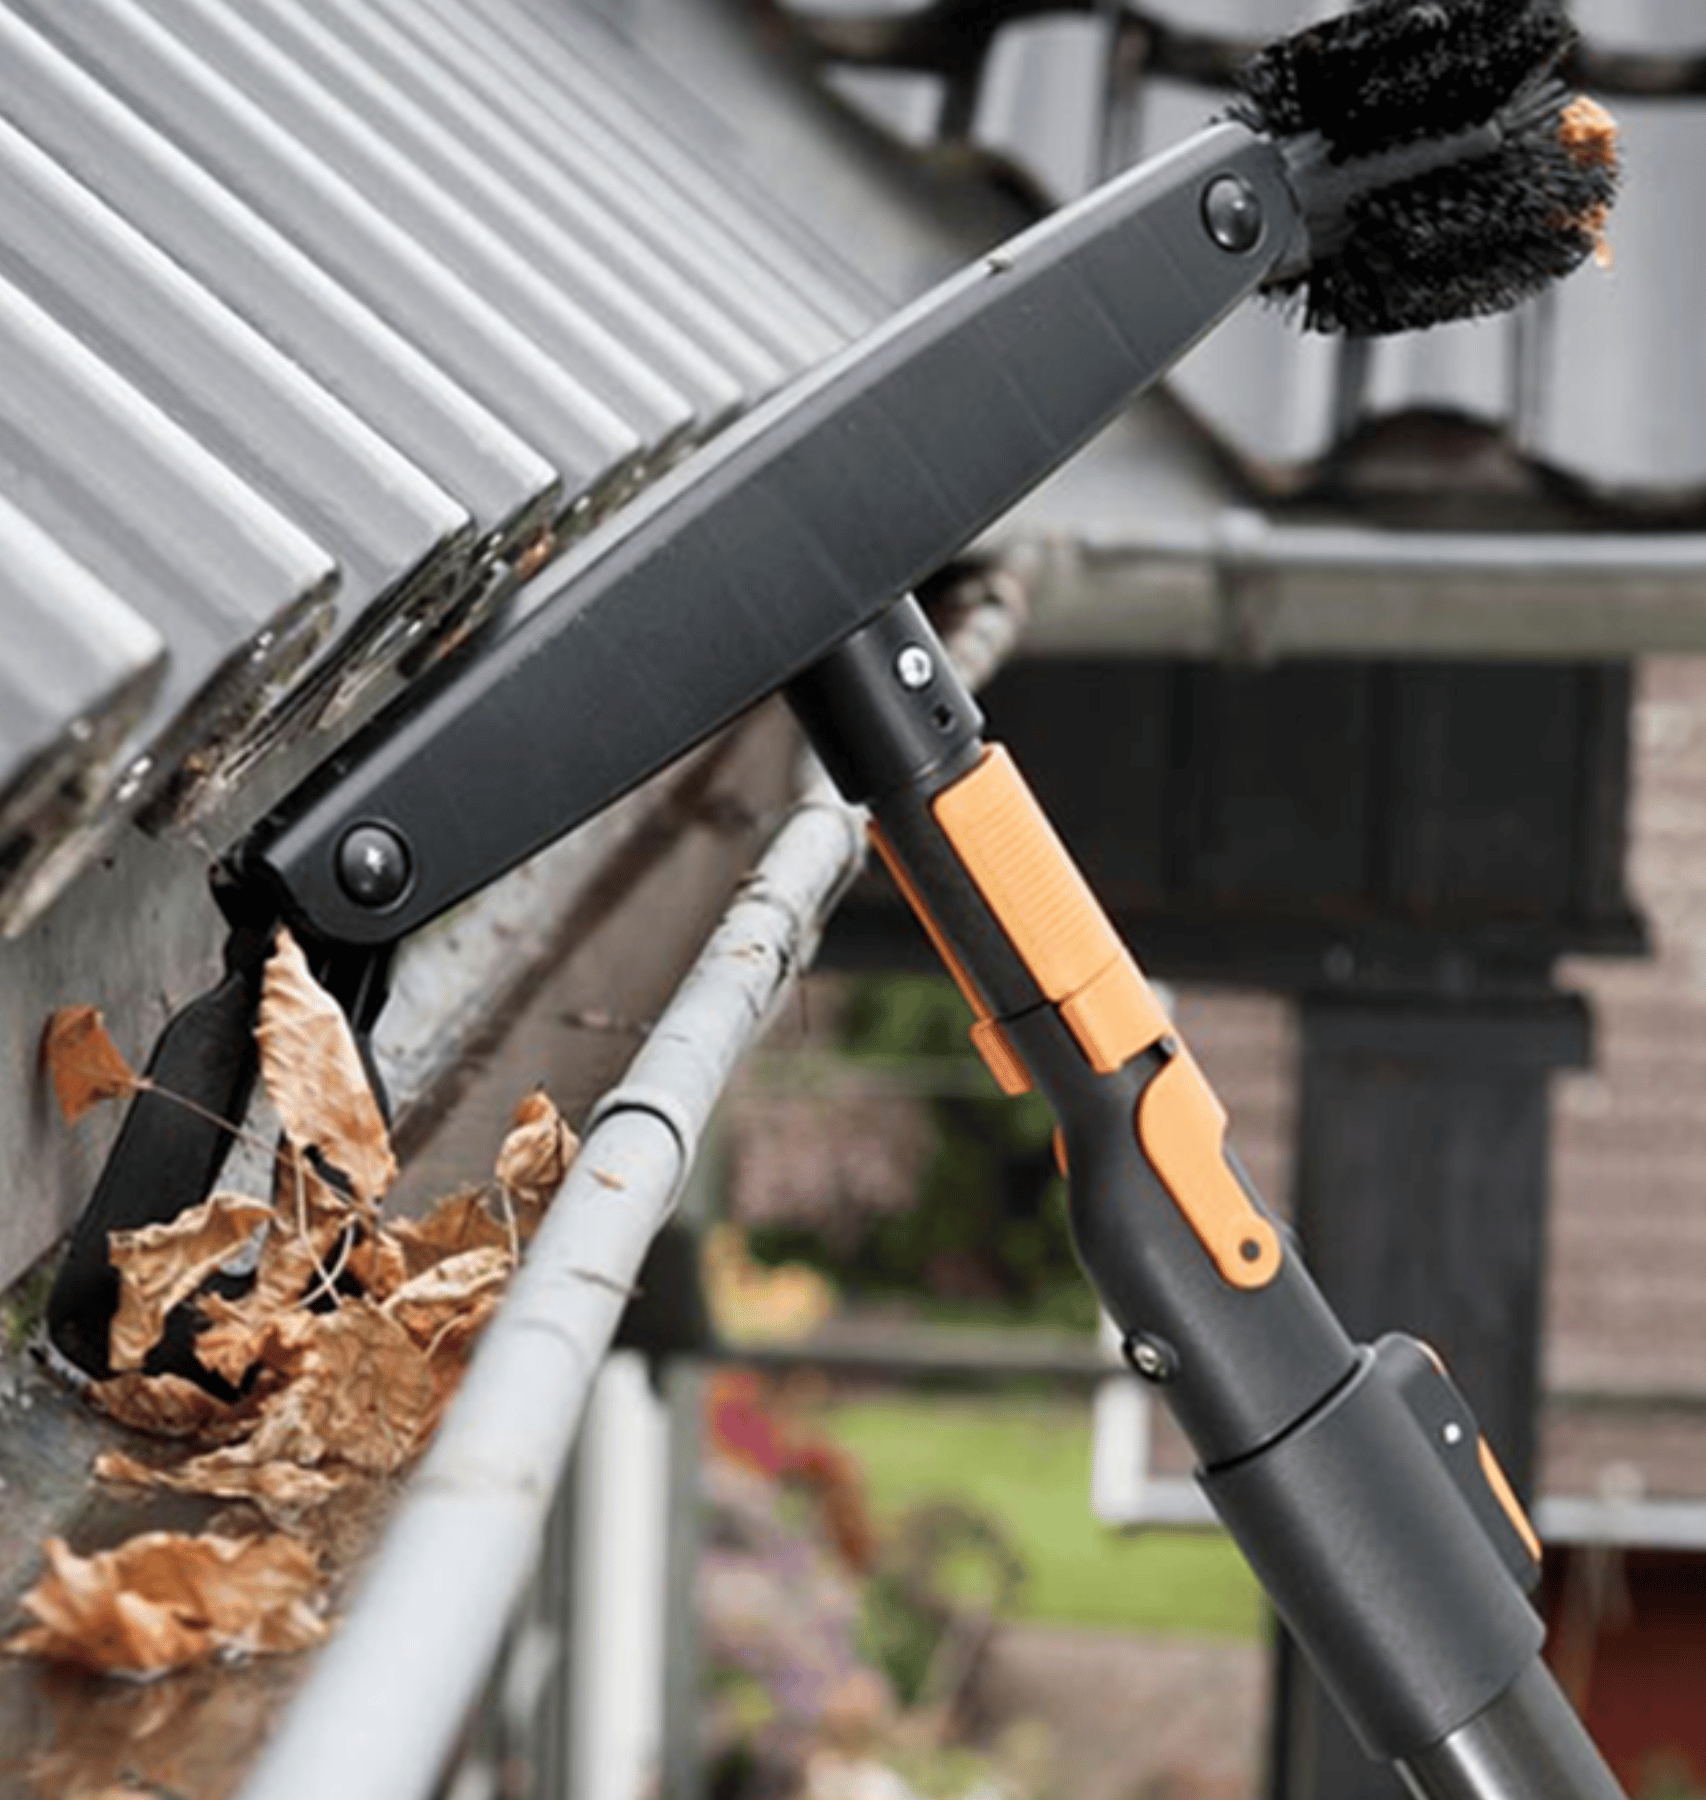 Cleaning apparatus like a squeegee and brush to remove leaves from a gutter full of brown leaves on a roof